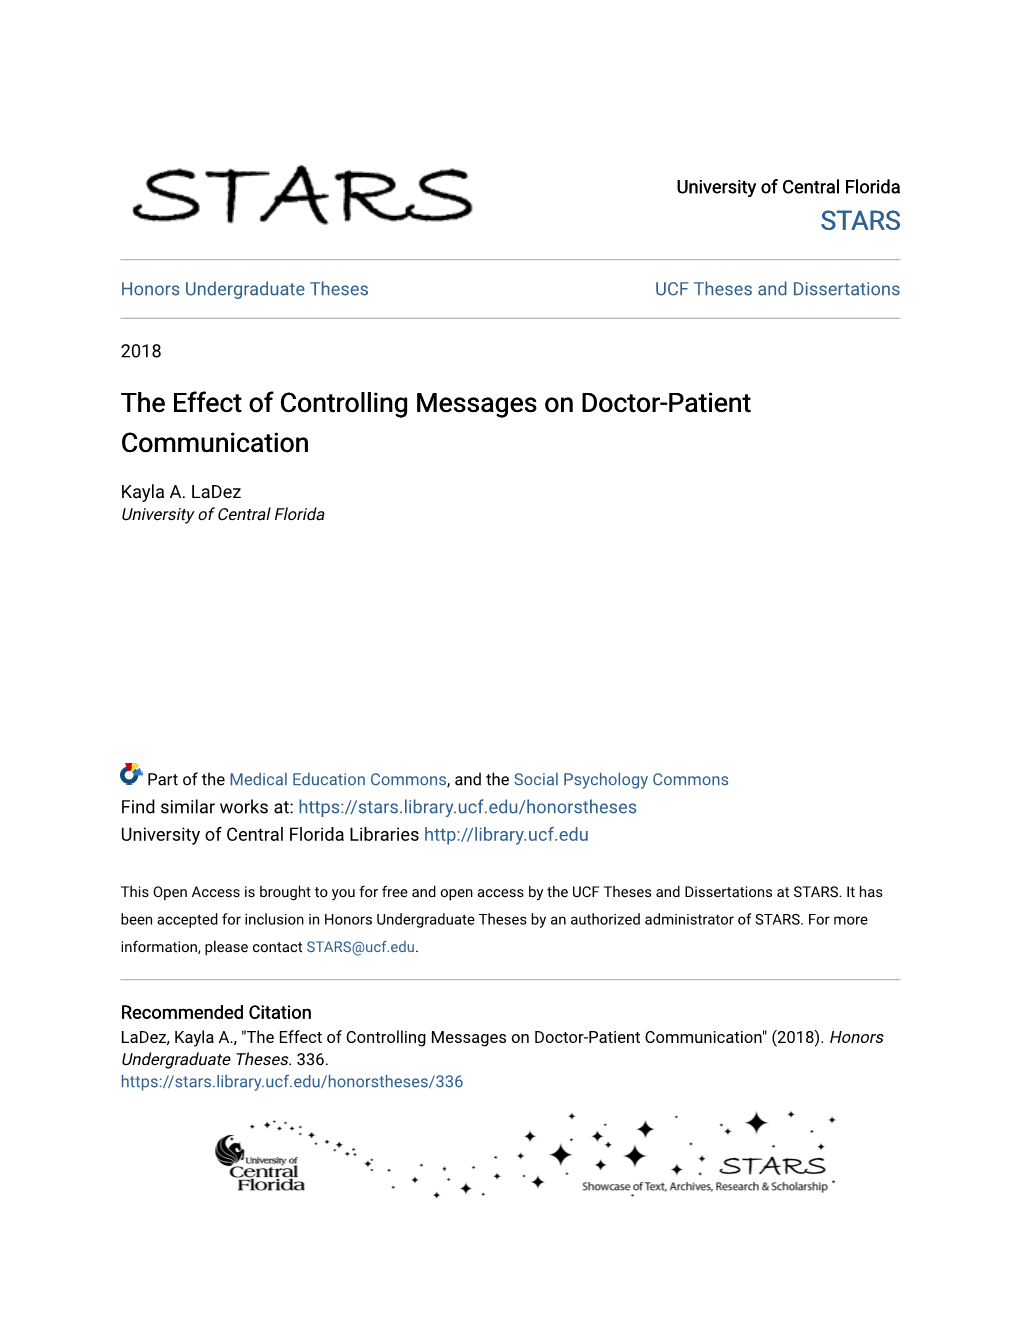 The Effect of Controlling Messages on Doctor-Patient Communication